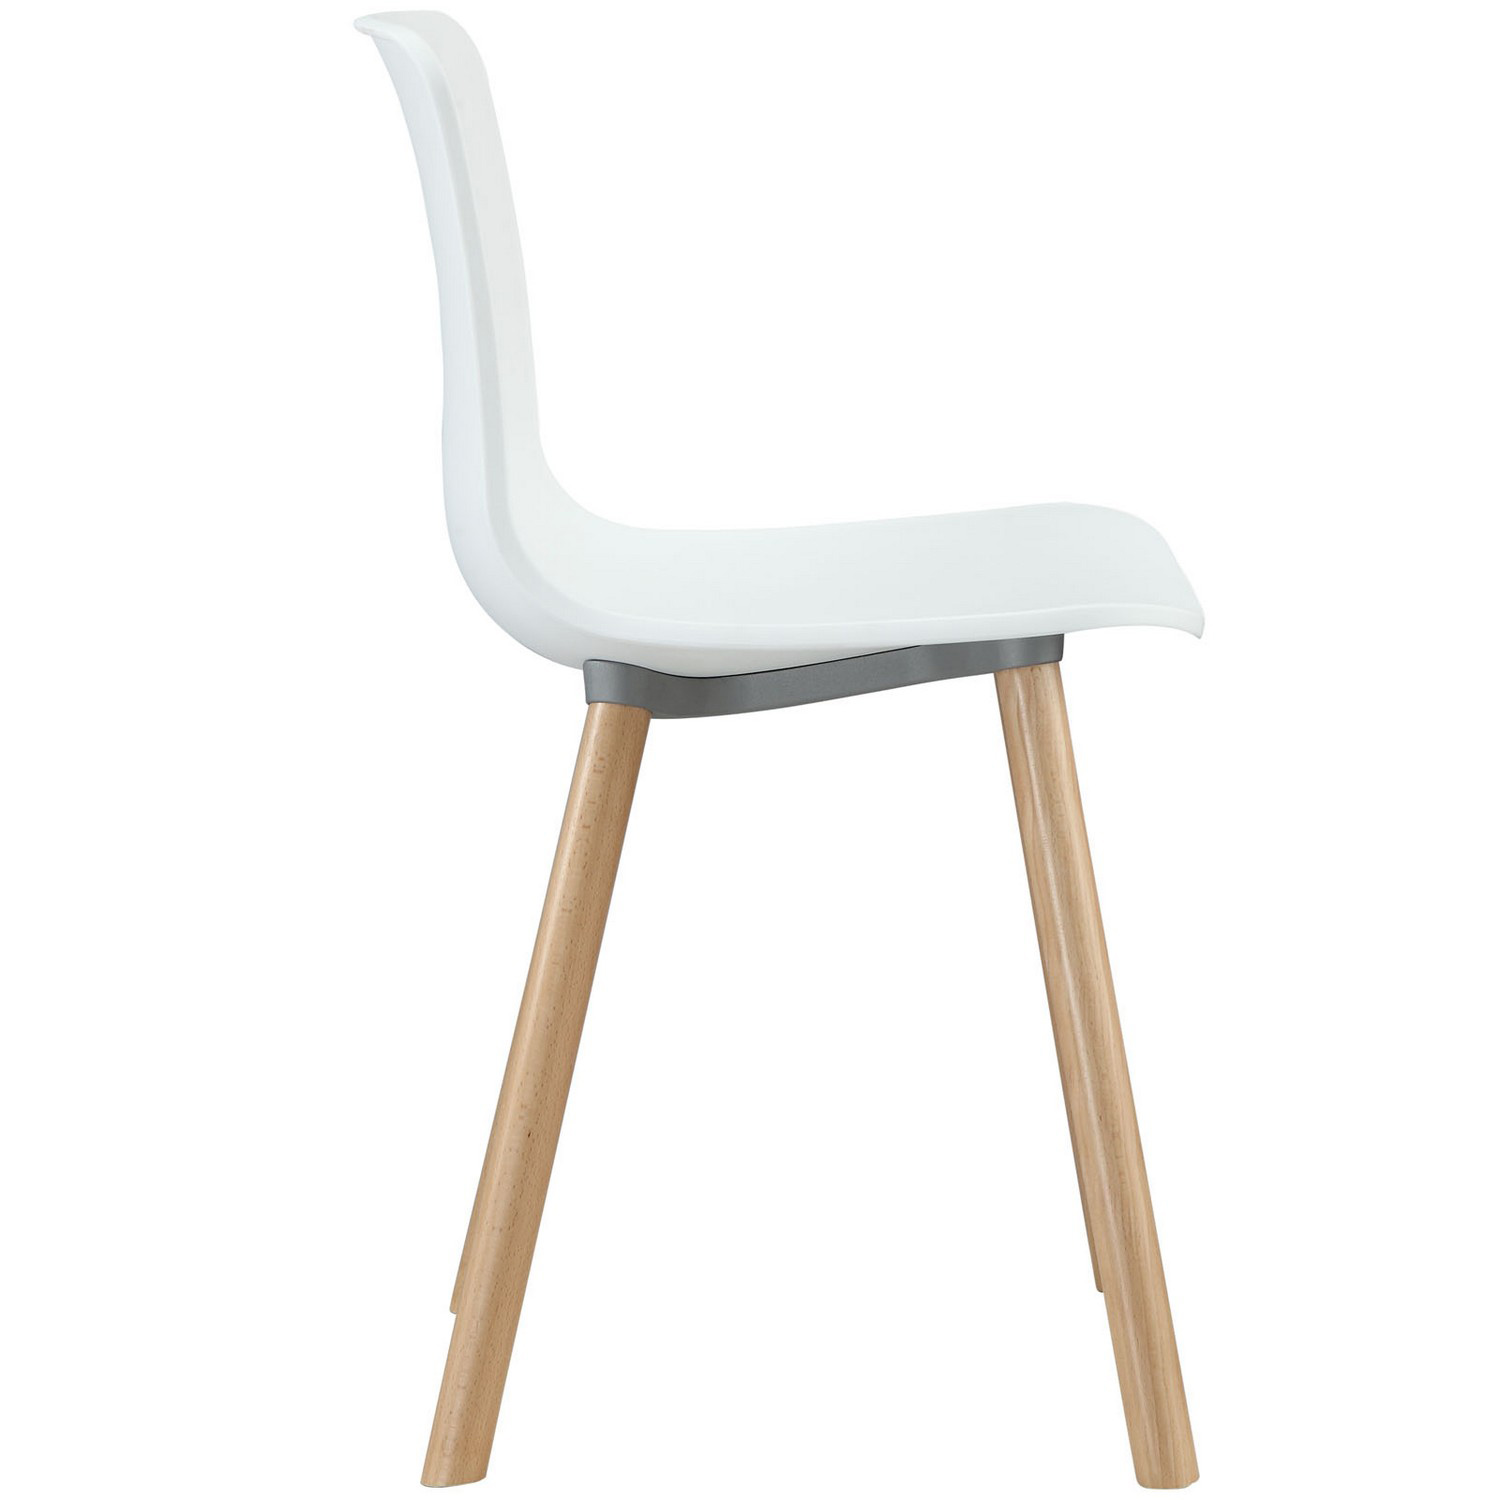 Modway Sprung Dining Side Chair - White